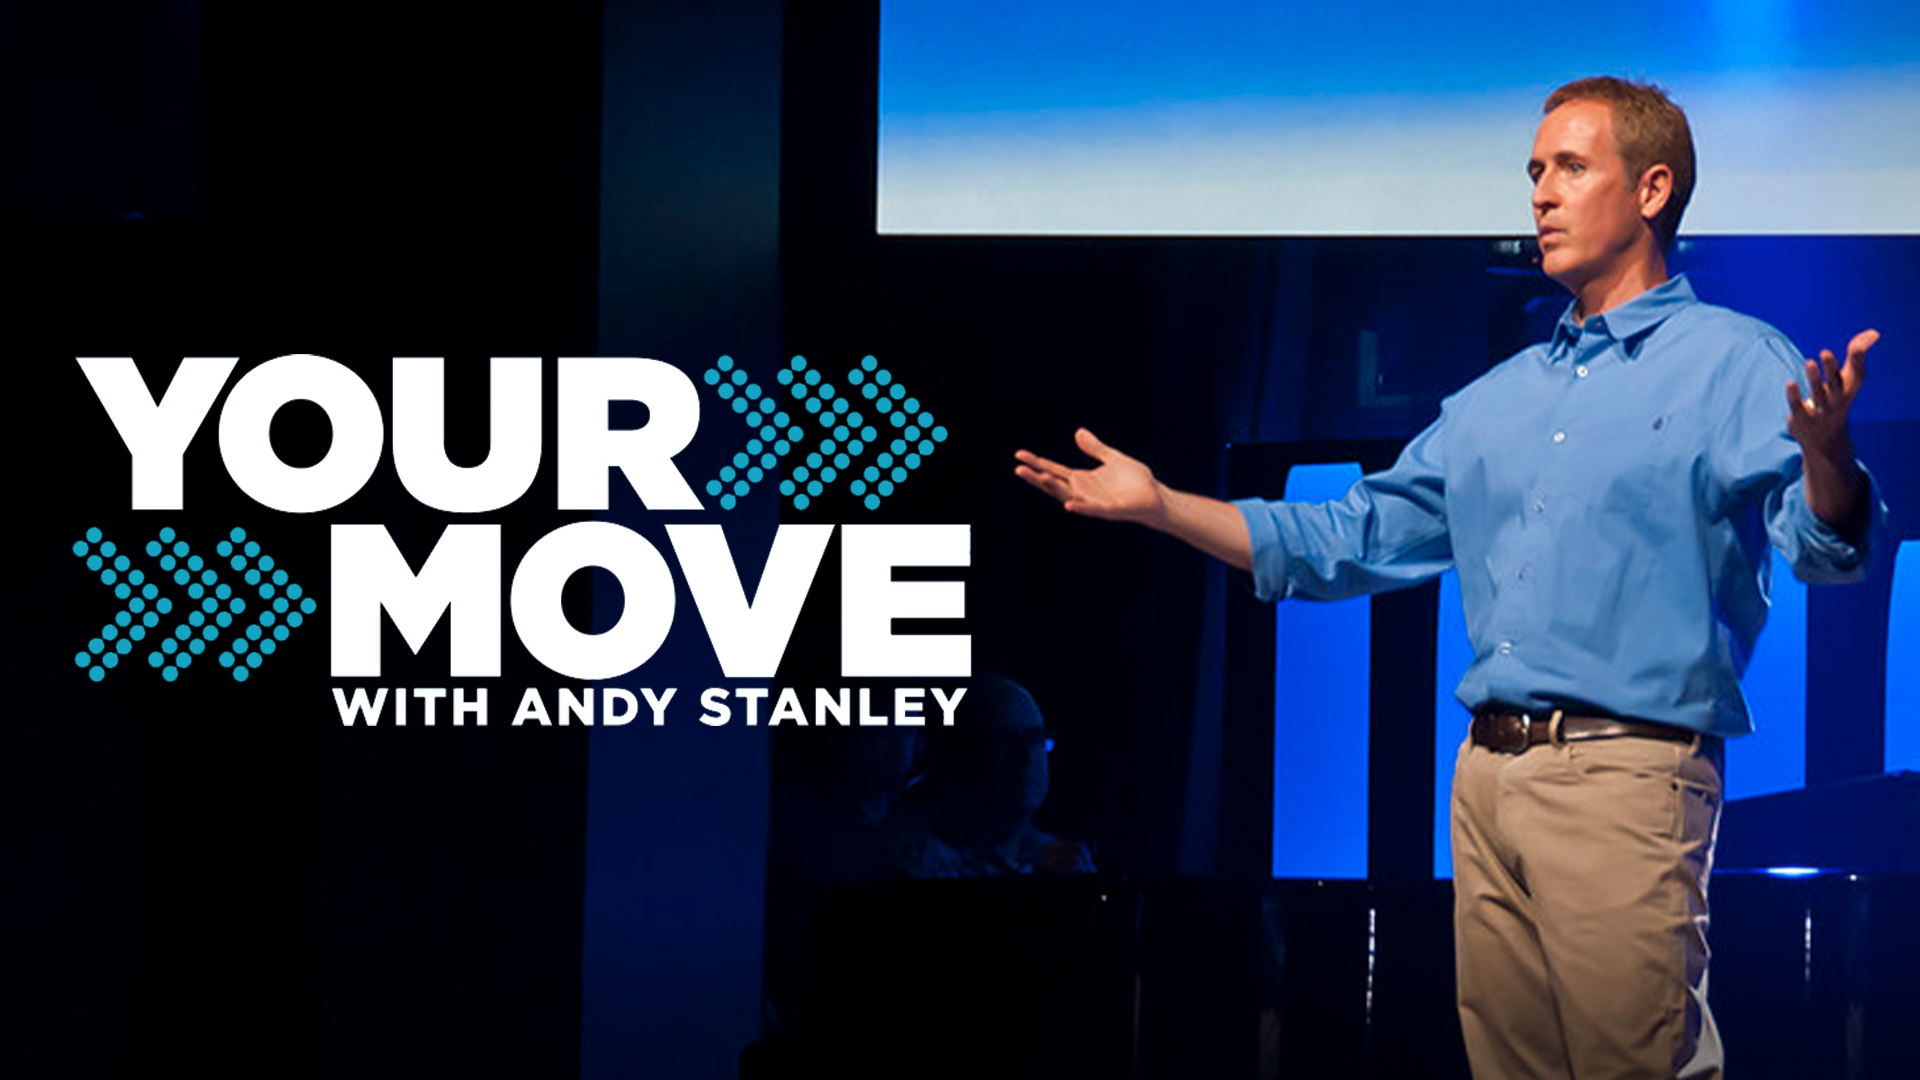 Your Move with Andy Stanley on TBN